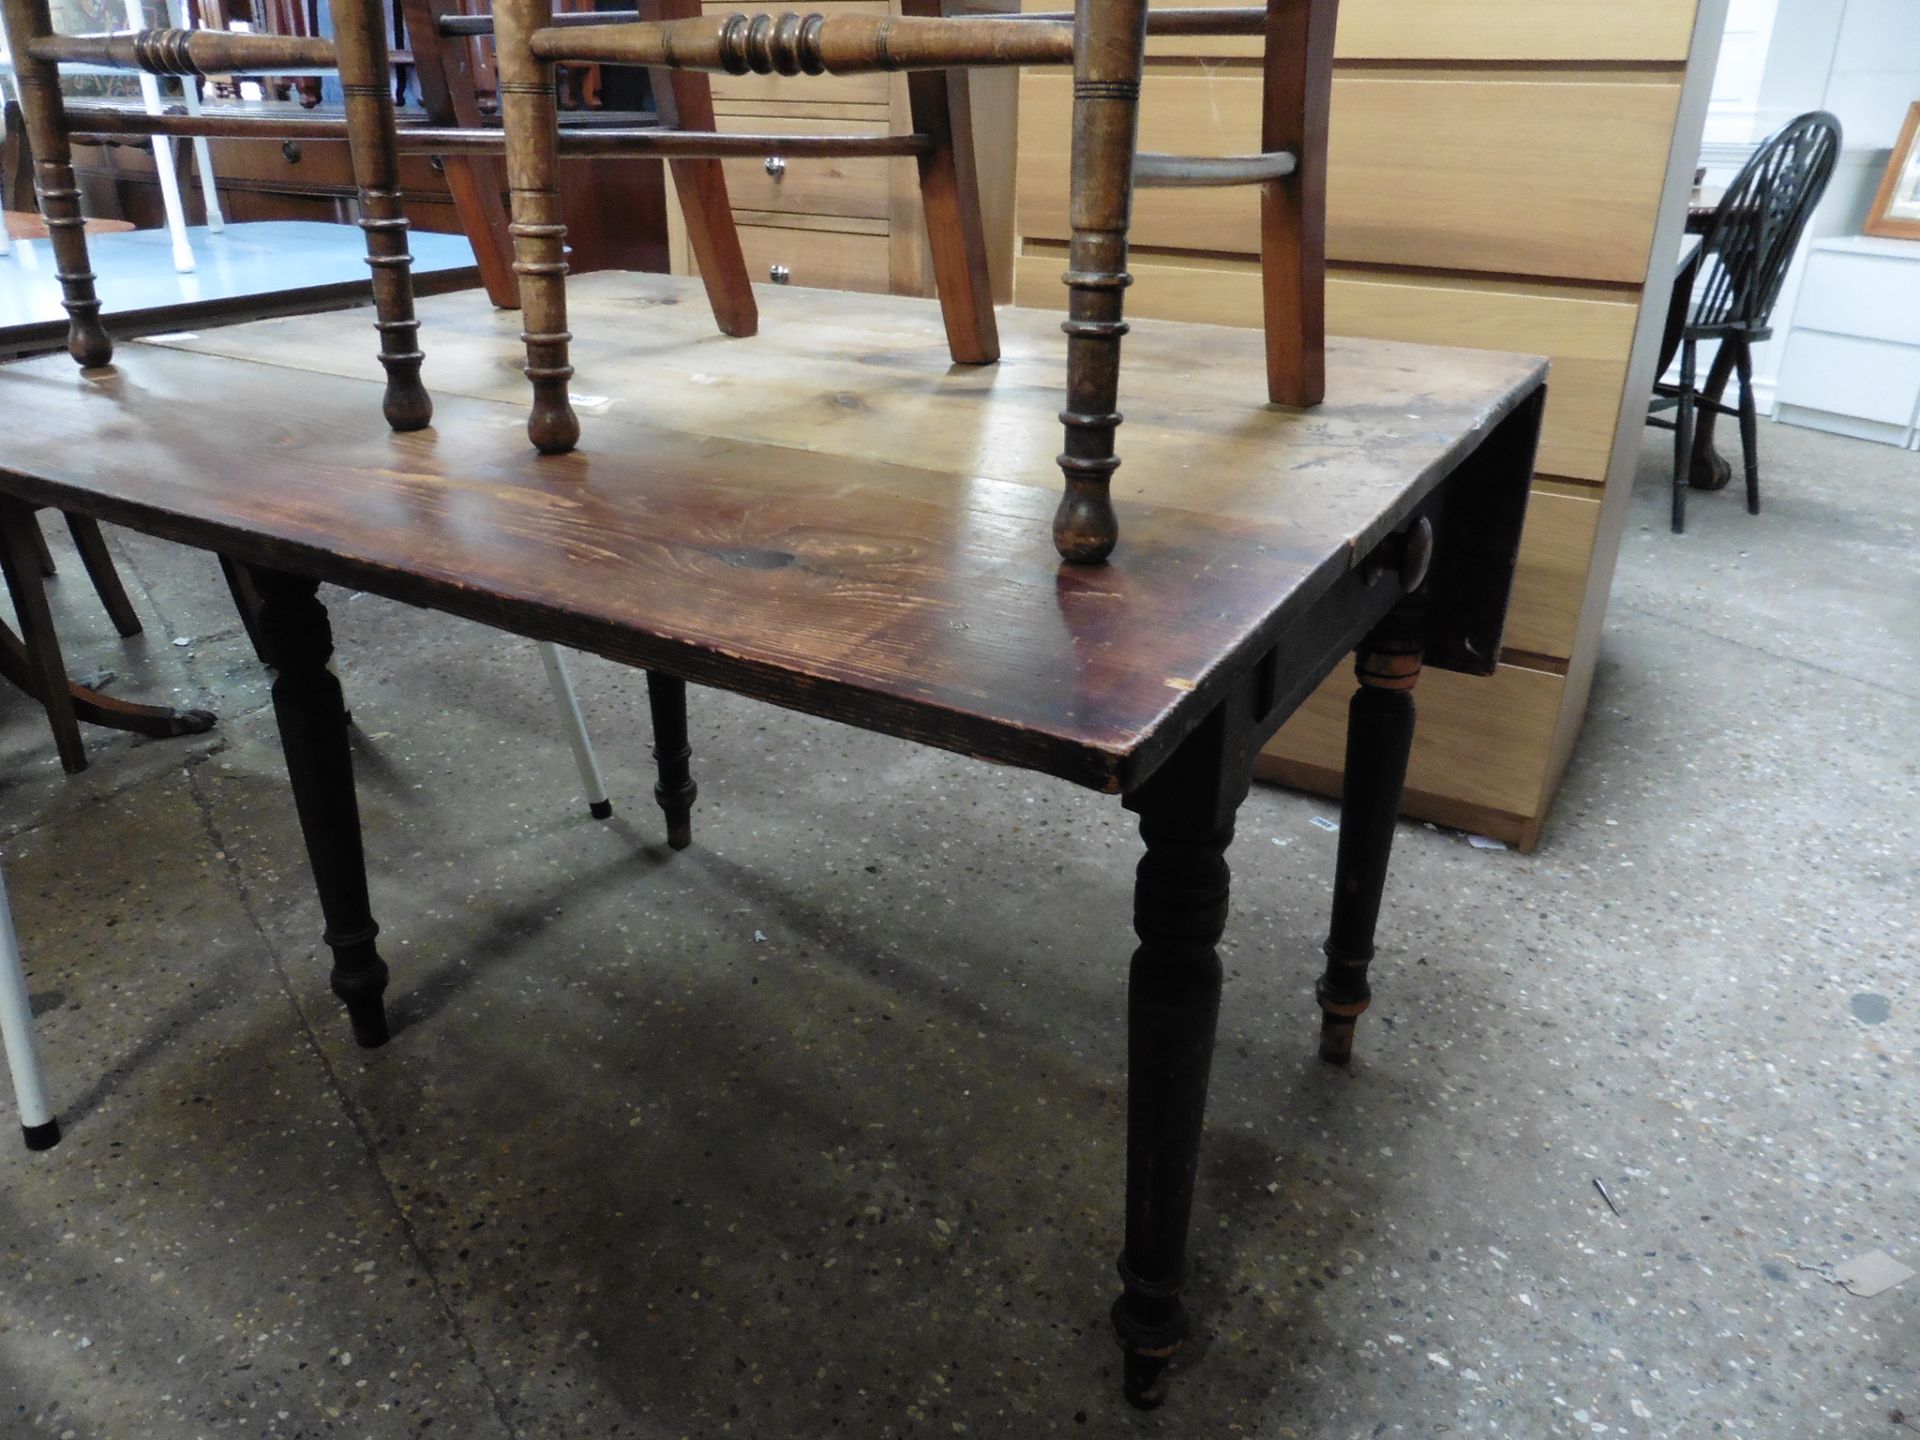 Pitch pine kitchen table with drop leaves and drawer